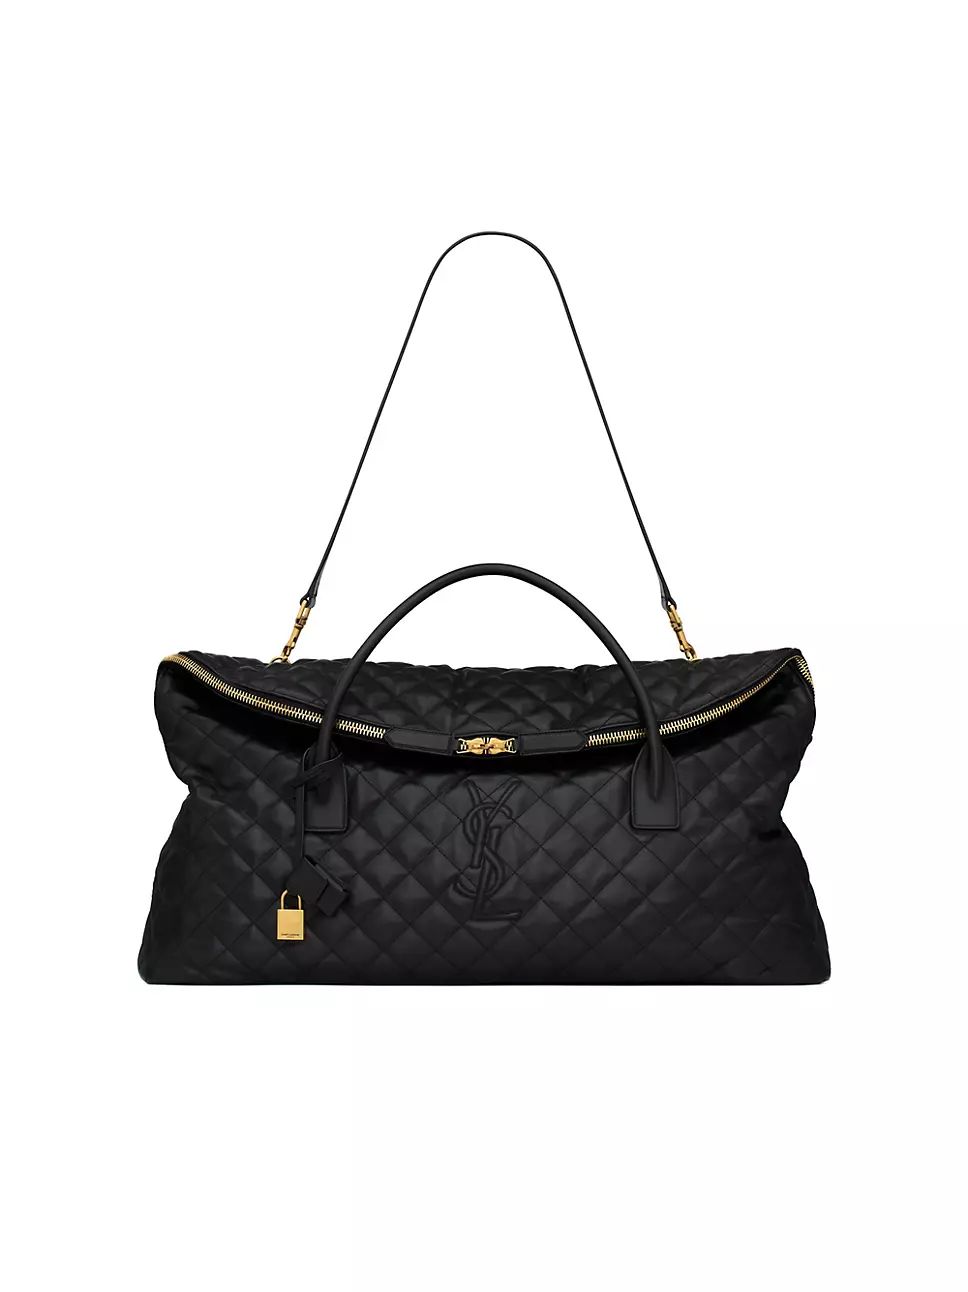 ES Giant Travel Bag in Quilted Leather | Saks Fifth Avenue